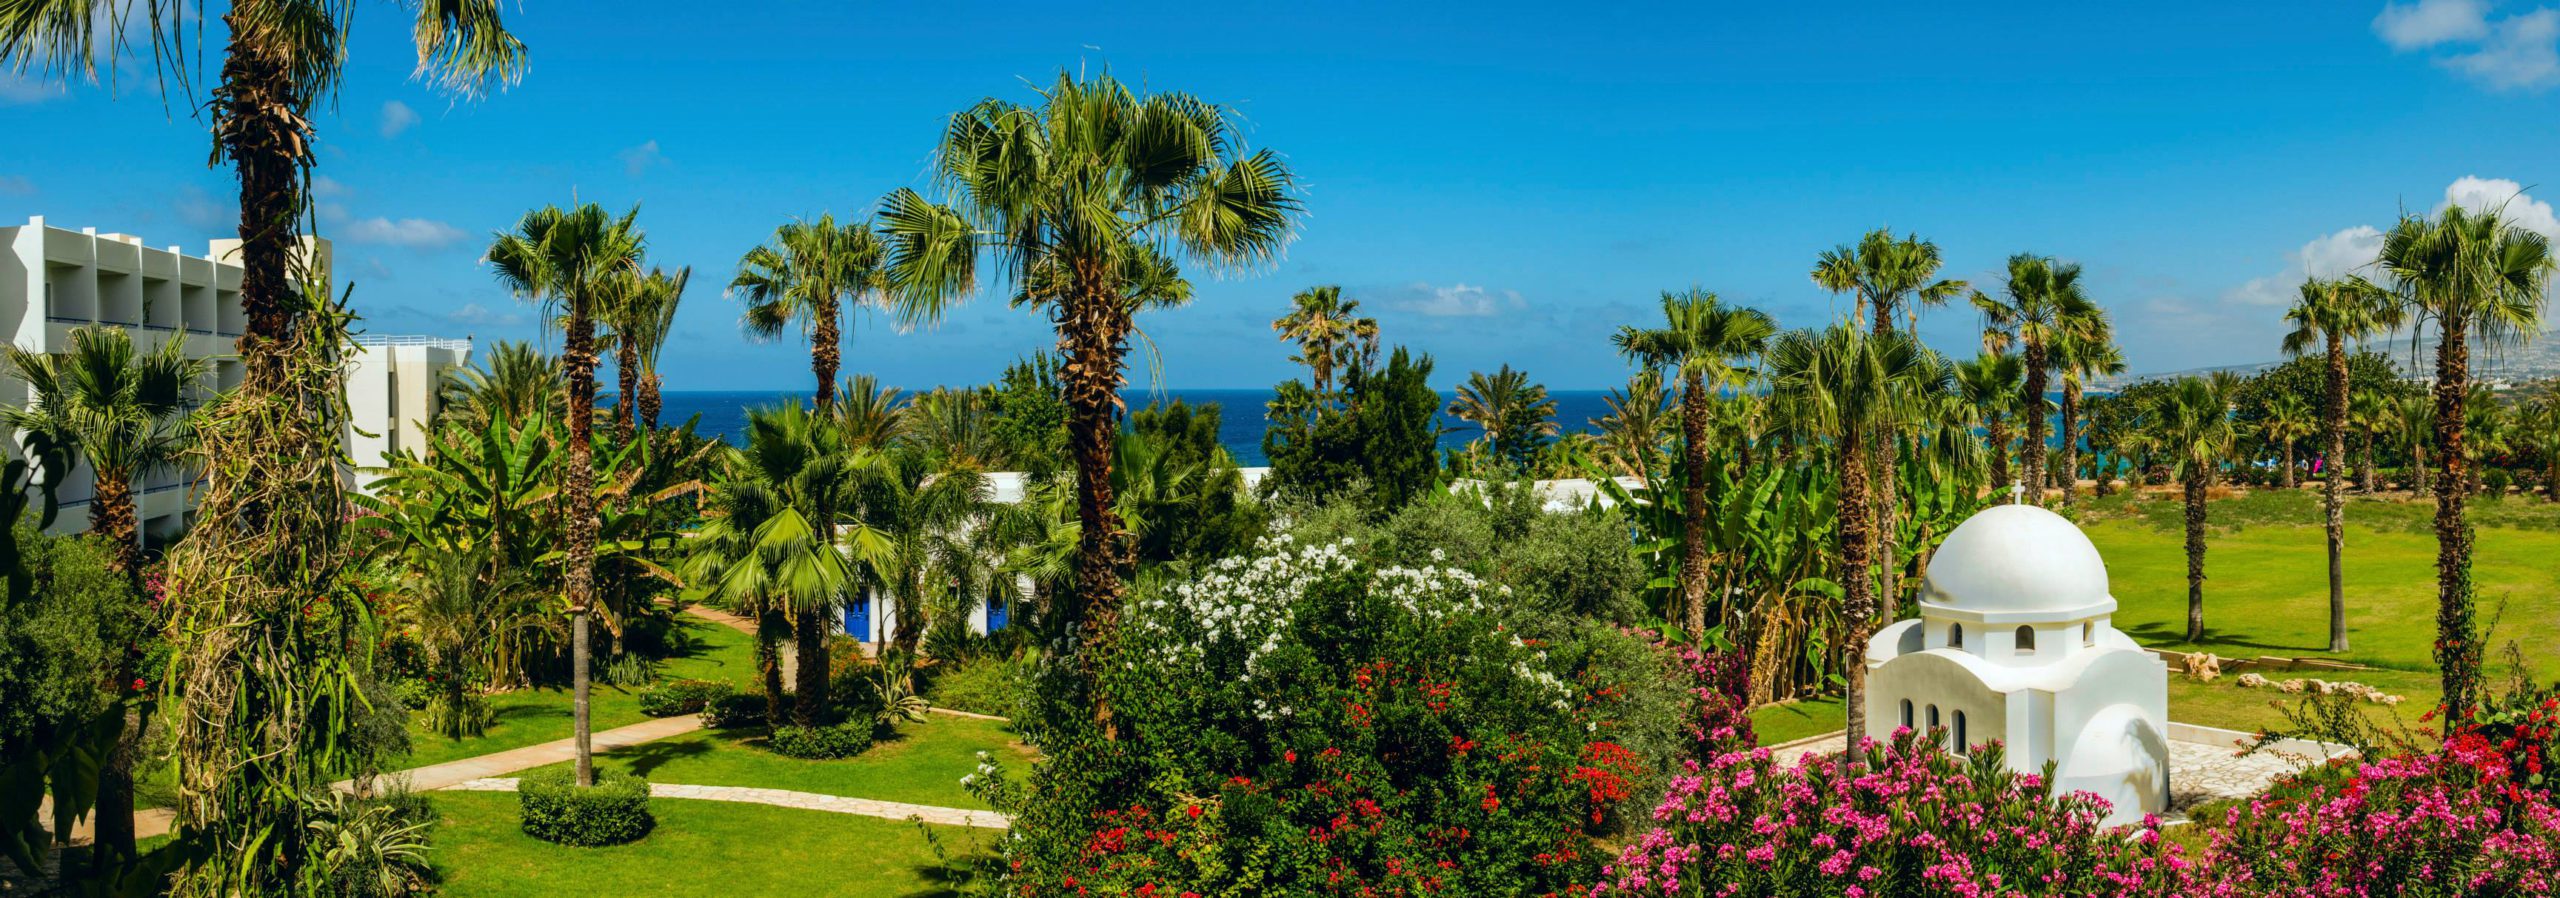 The lush greenery around the property of Azia Resort & Spa, one of the best all-inclusive resorts in Cyprus for families.